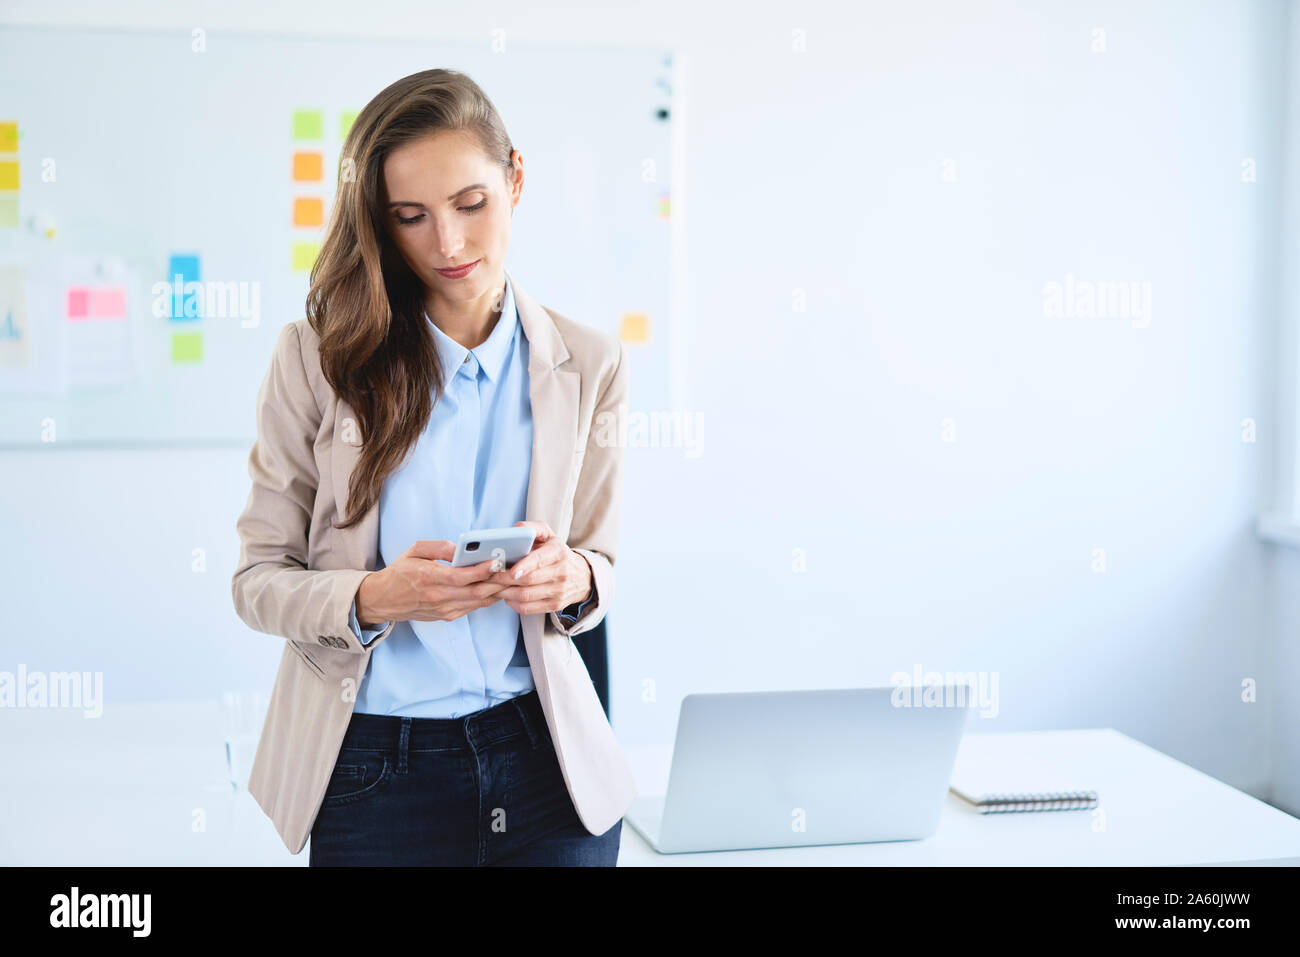 Businesswoman using smartphone leaning on office desk Banque D'Images